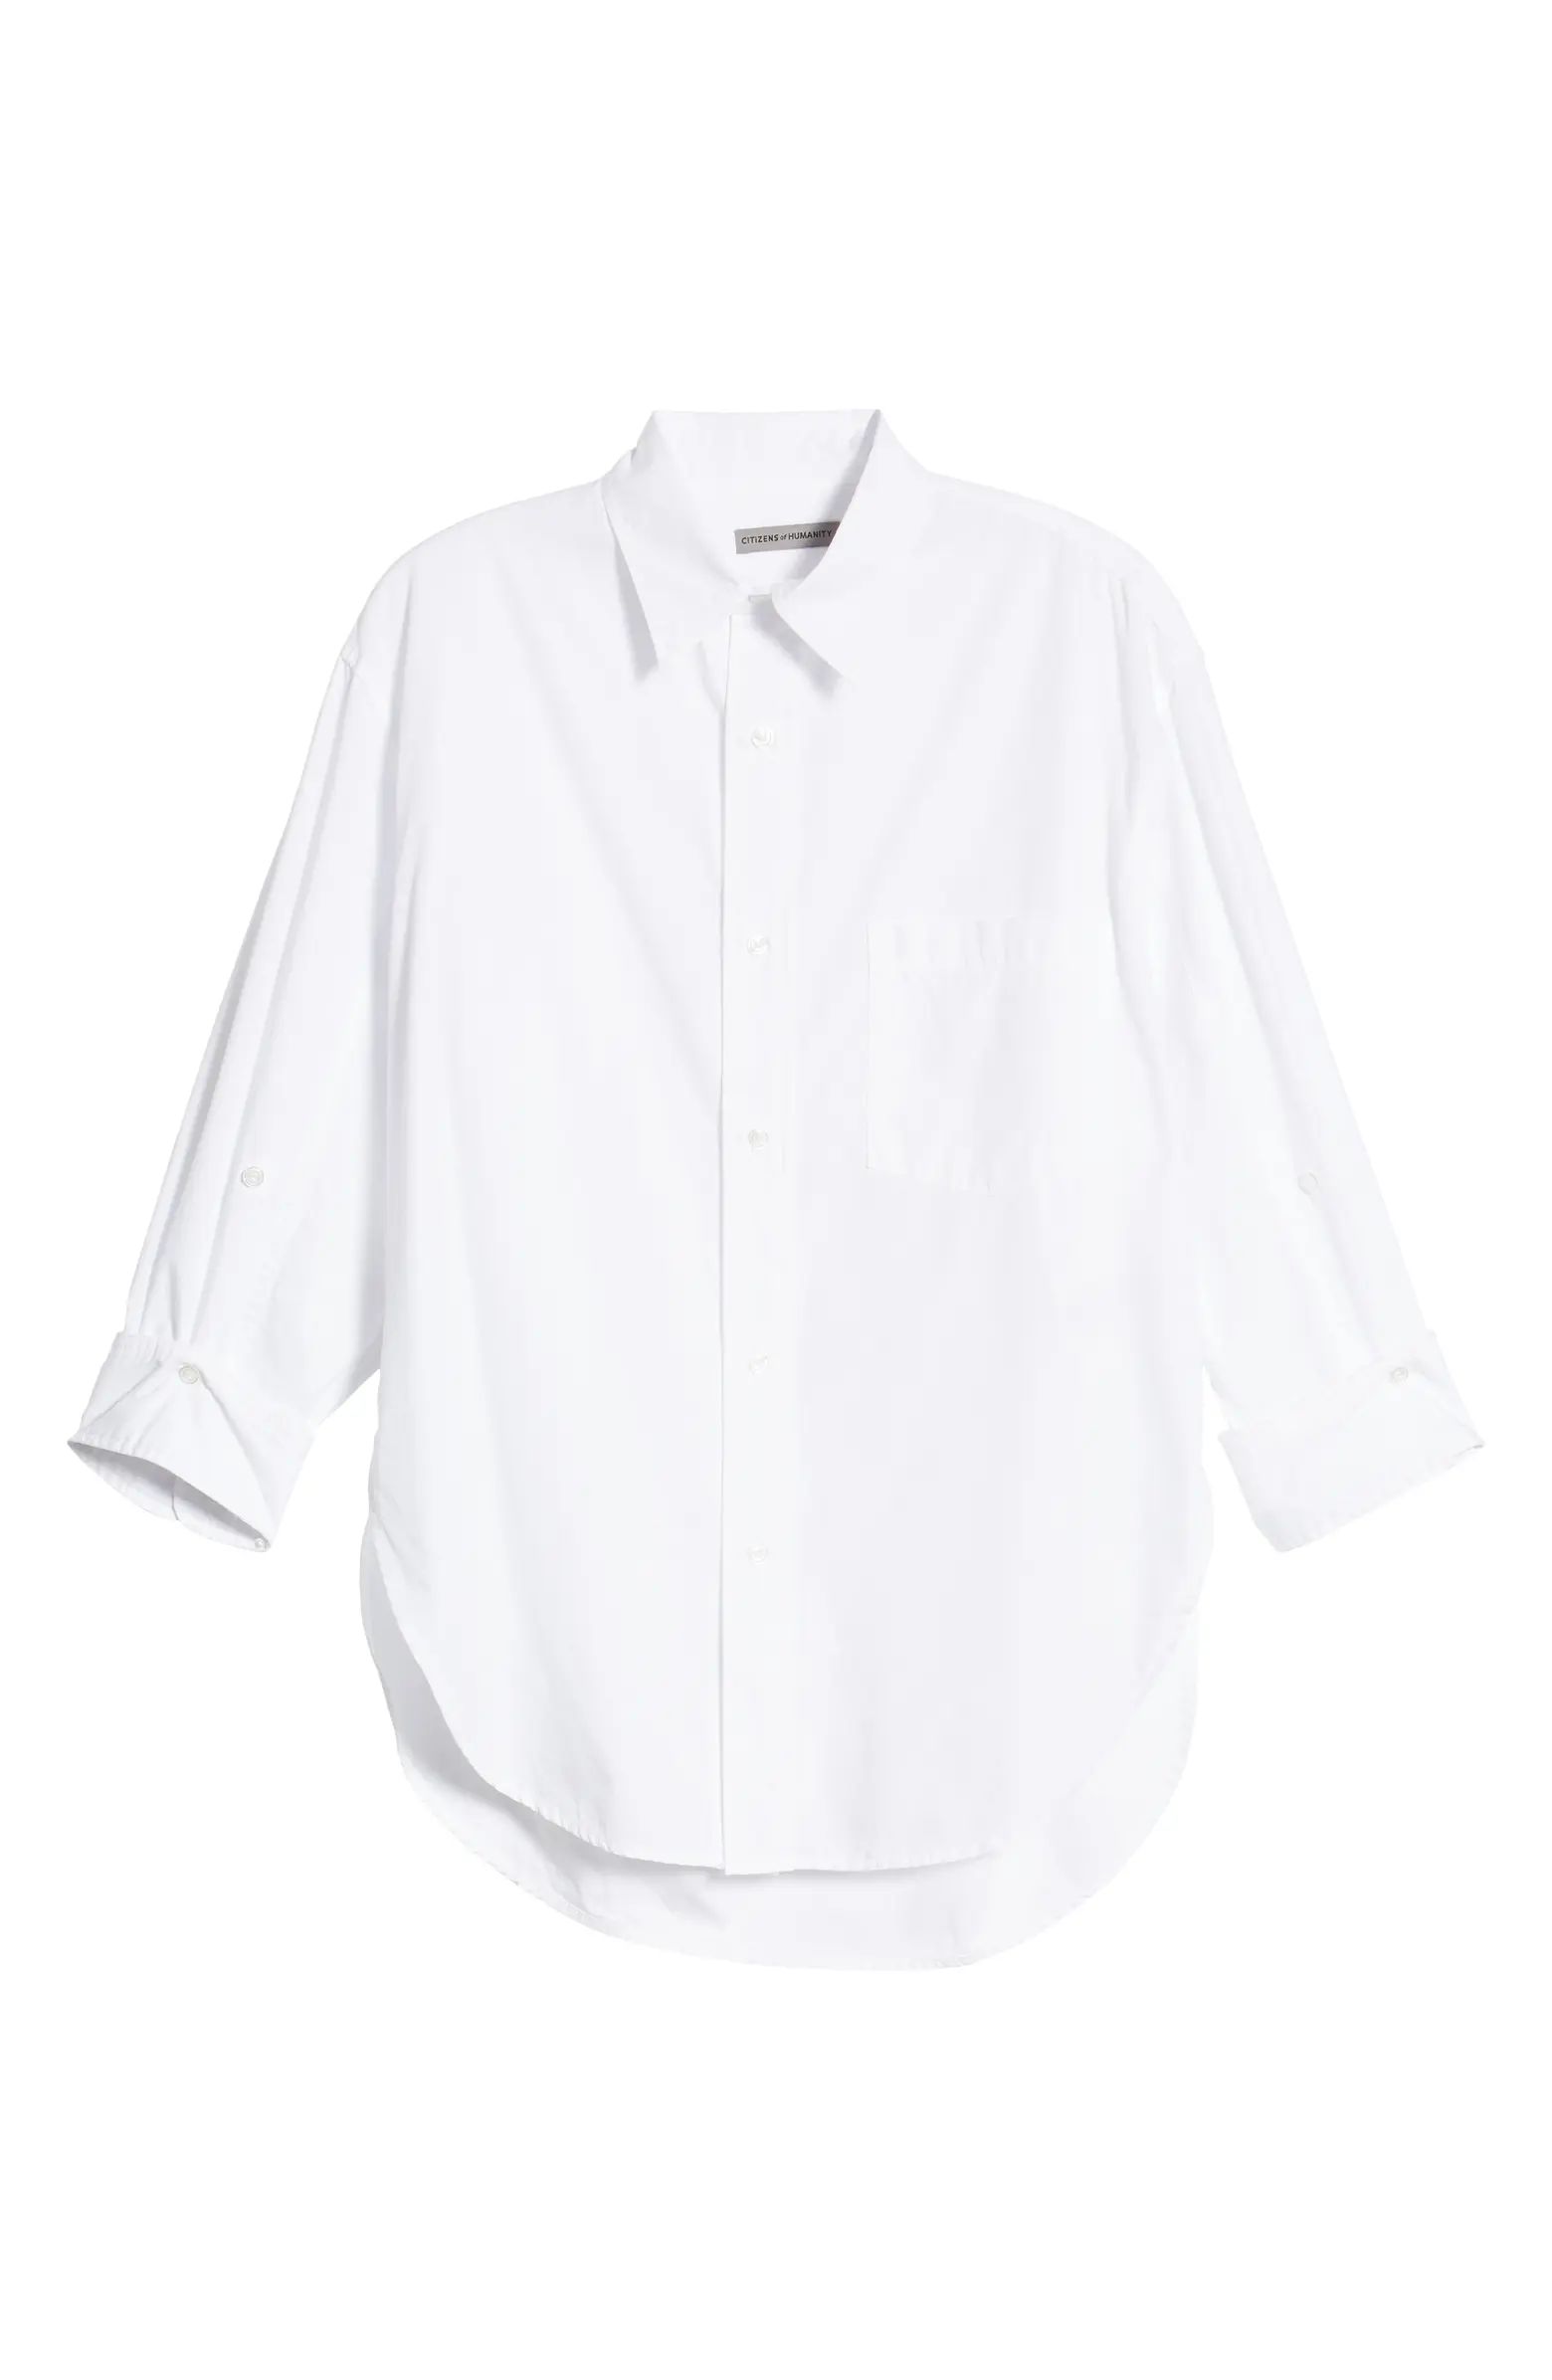 Citizens of Humanity Kayla White Cotton Shirt | Nordstrom | Nordstrom